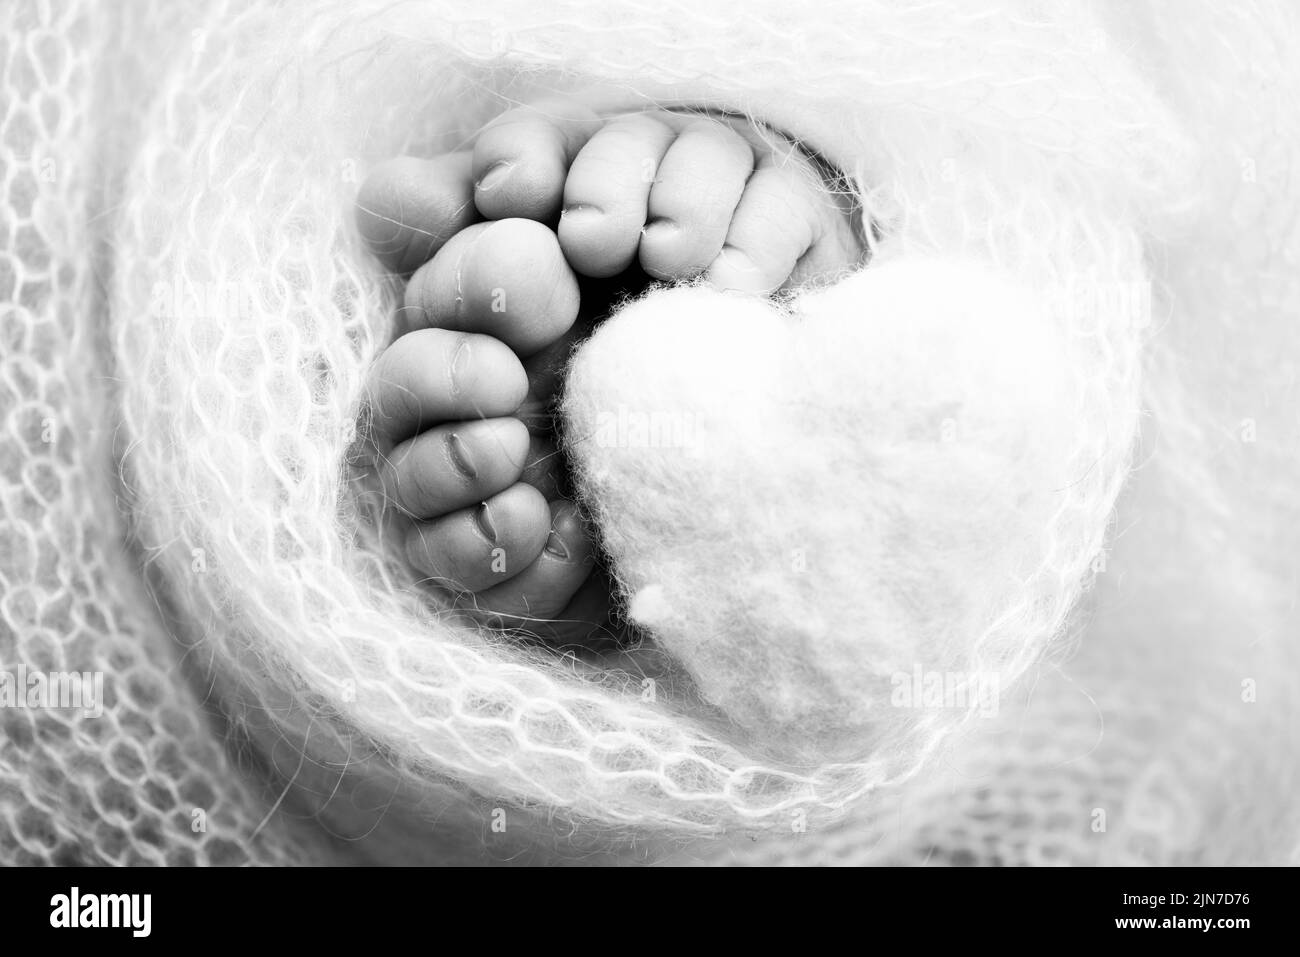 The tiny foot of a newborn baby. Soft feet of a new born in a wool blanket. Stock Photo